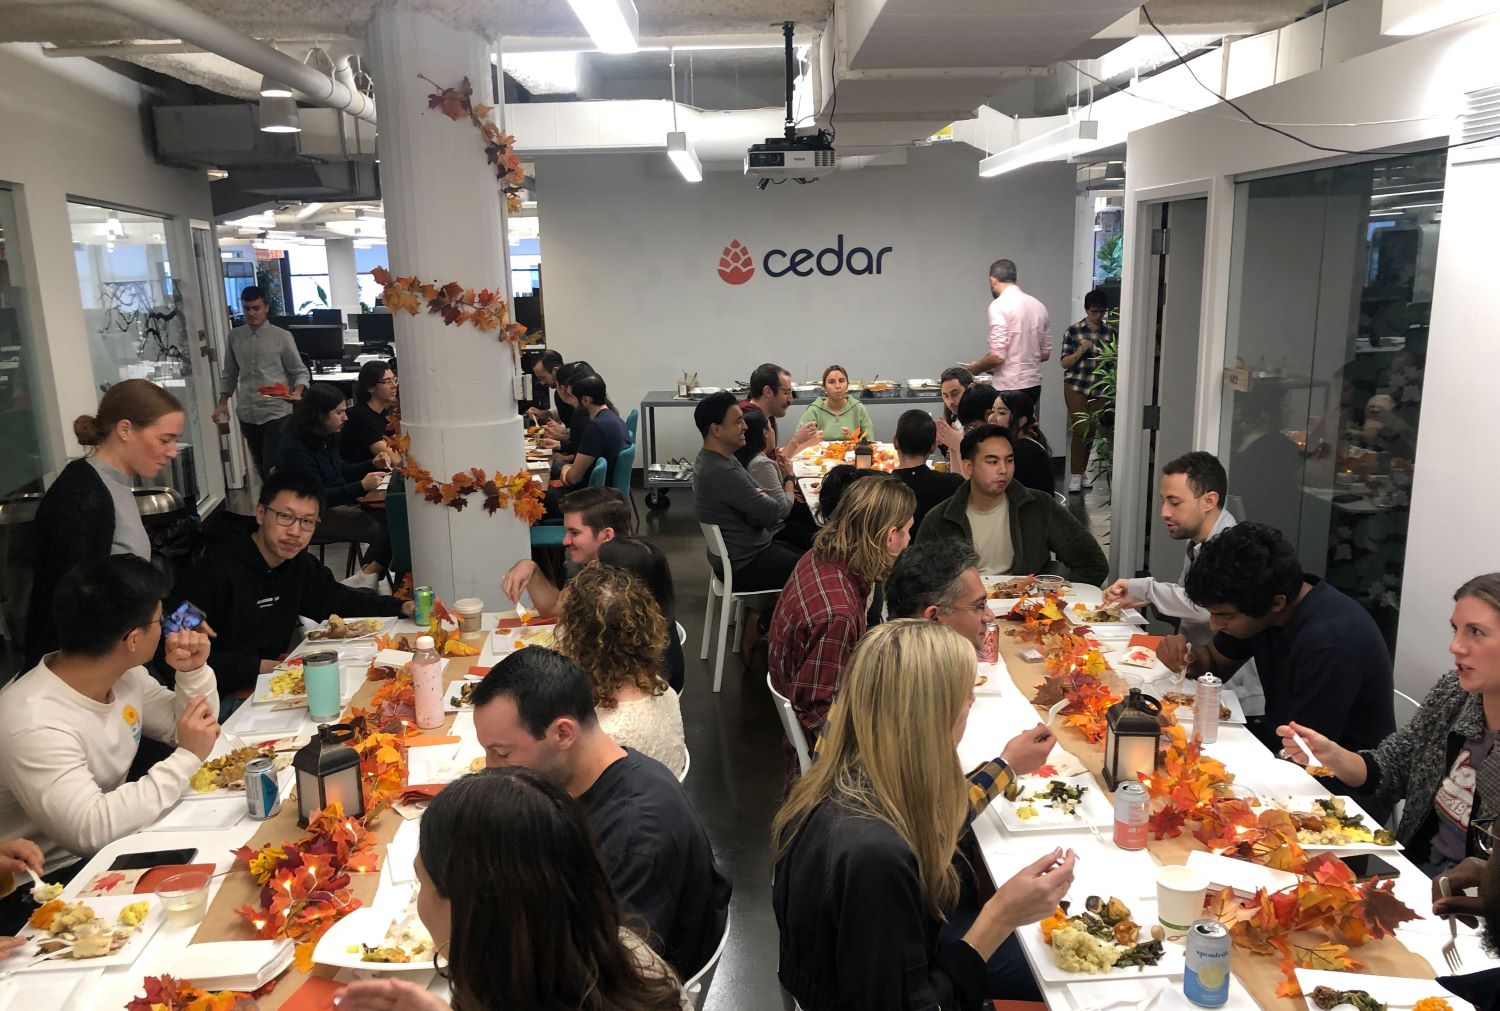 Cedar staff celebrate in Thanksgiving holiday party